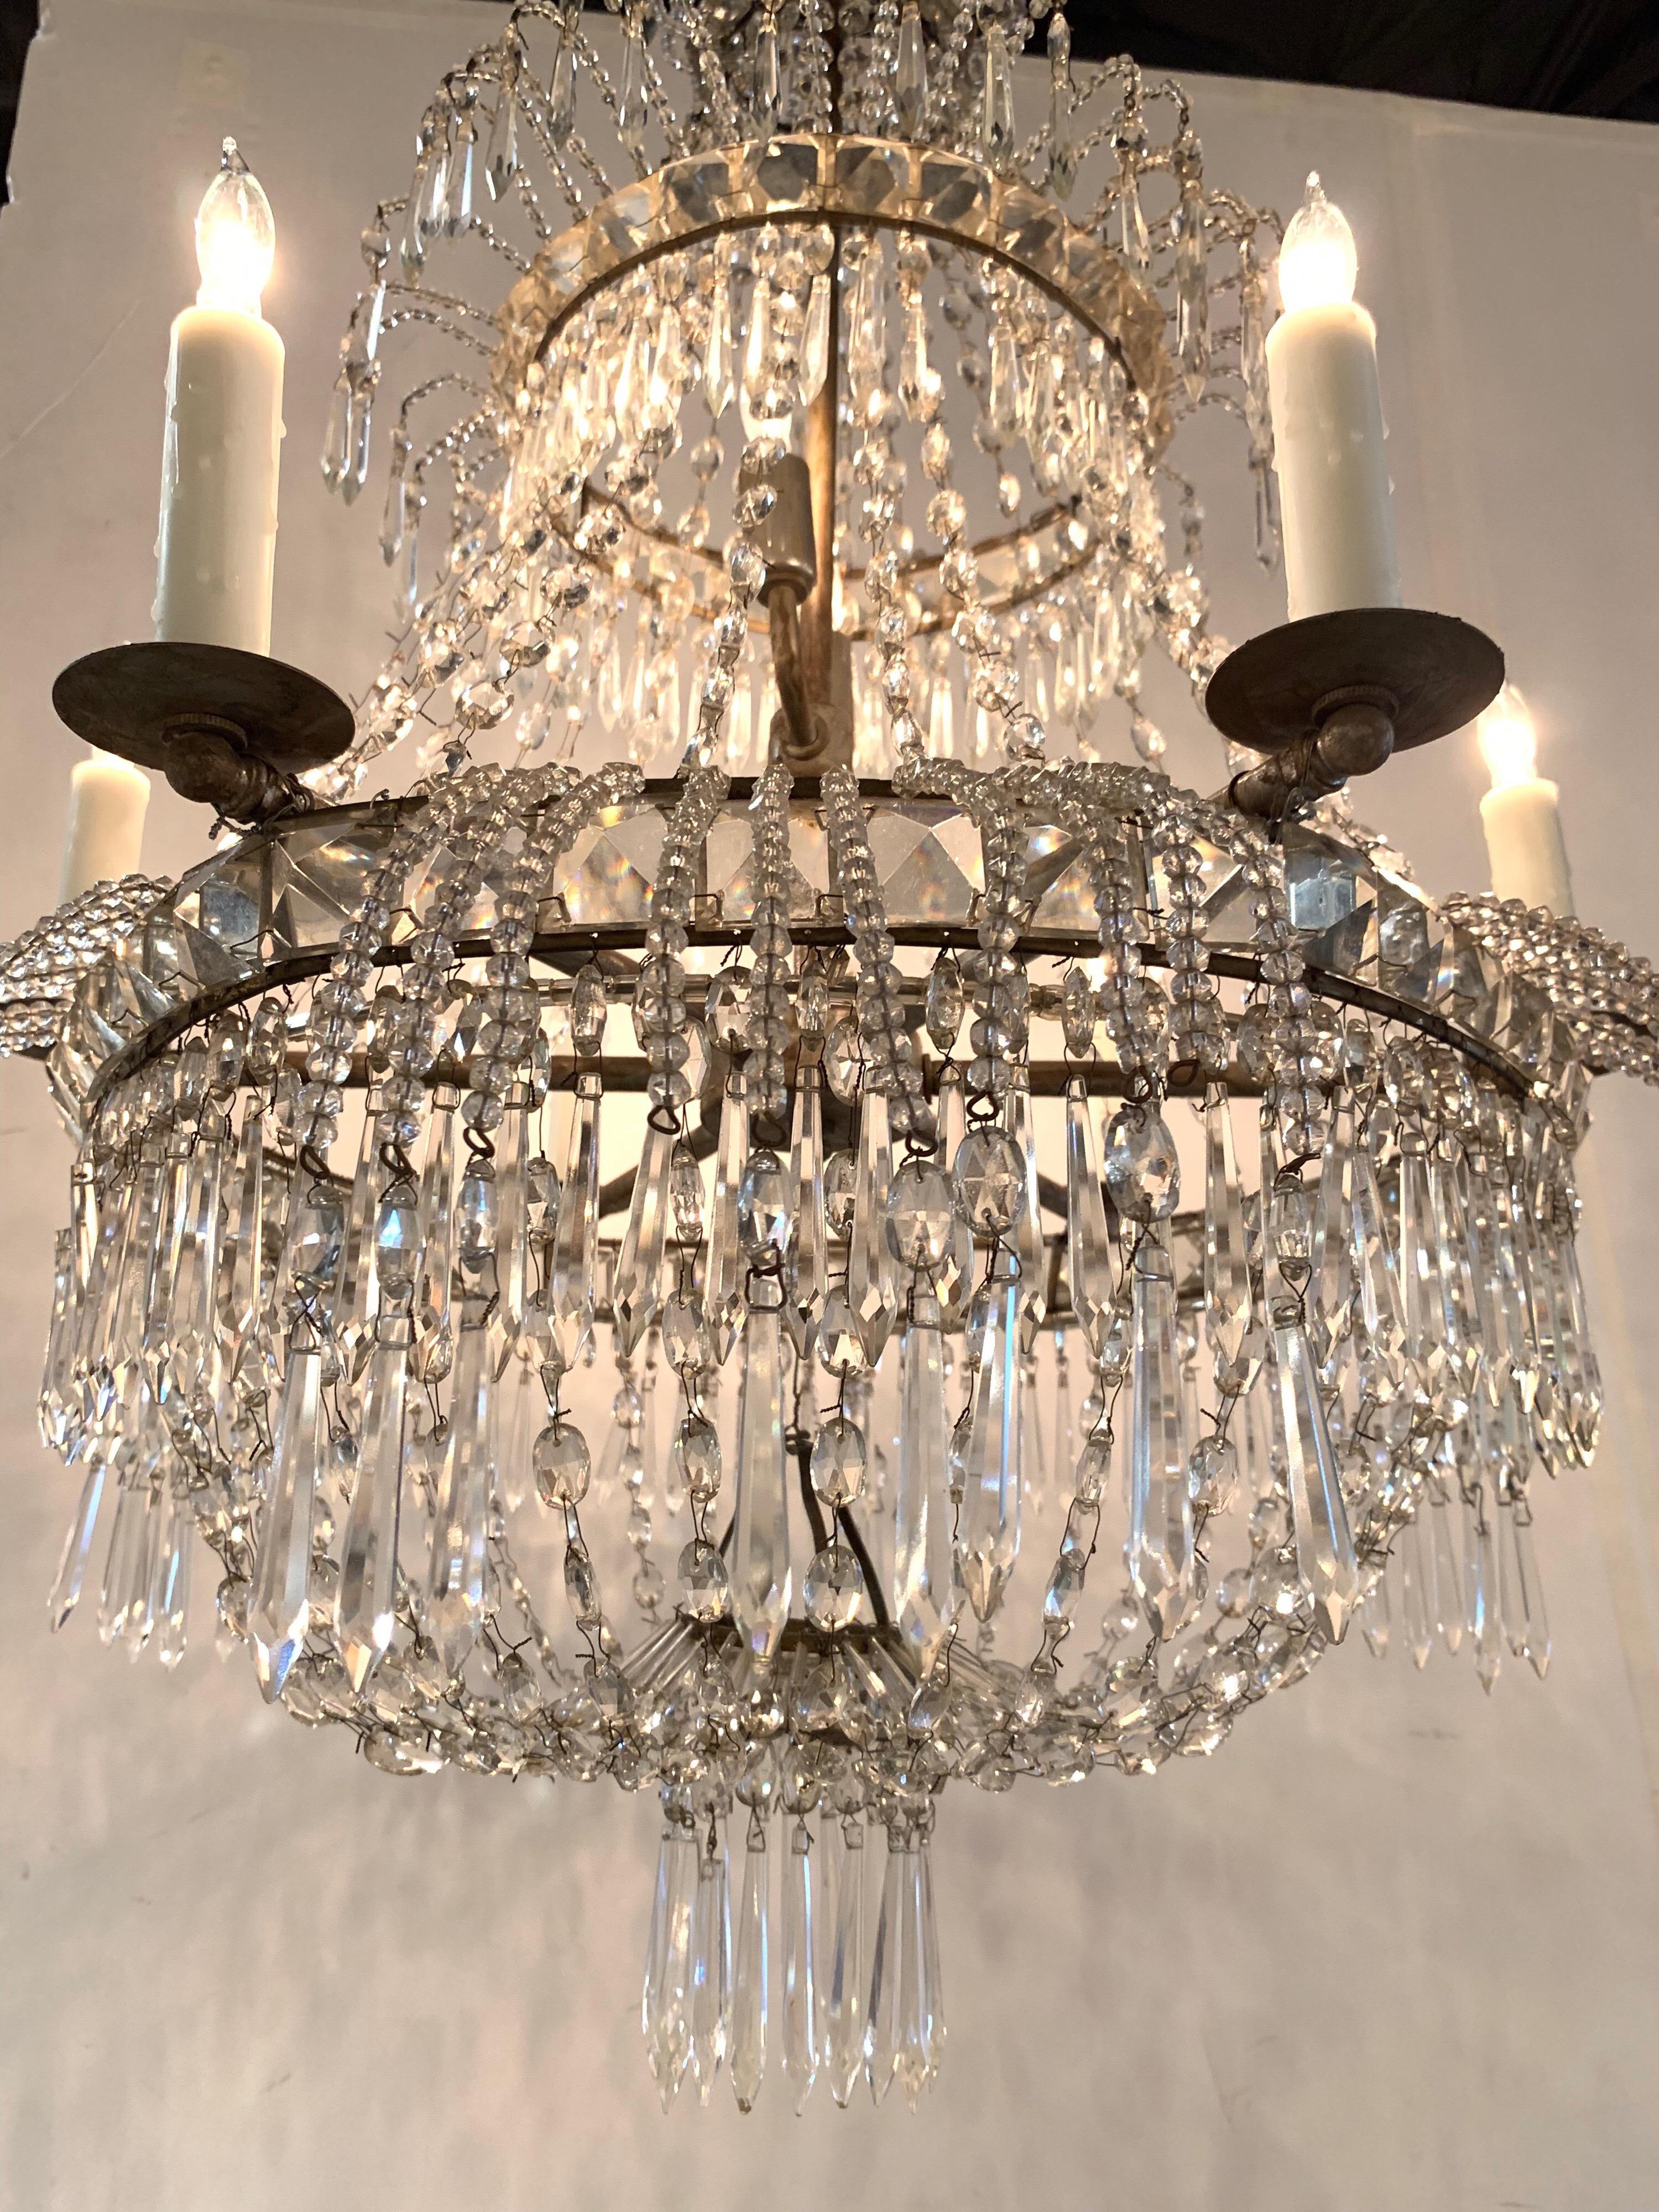 Very unique early 19th century Swedish beaded crystal chandelier. This basket form, pagoda inspired chandelier has a lovely array of beads and prisms. Makes a refined statement.